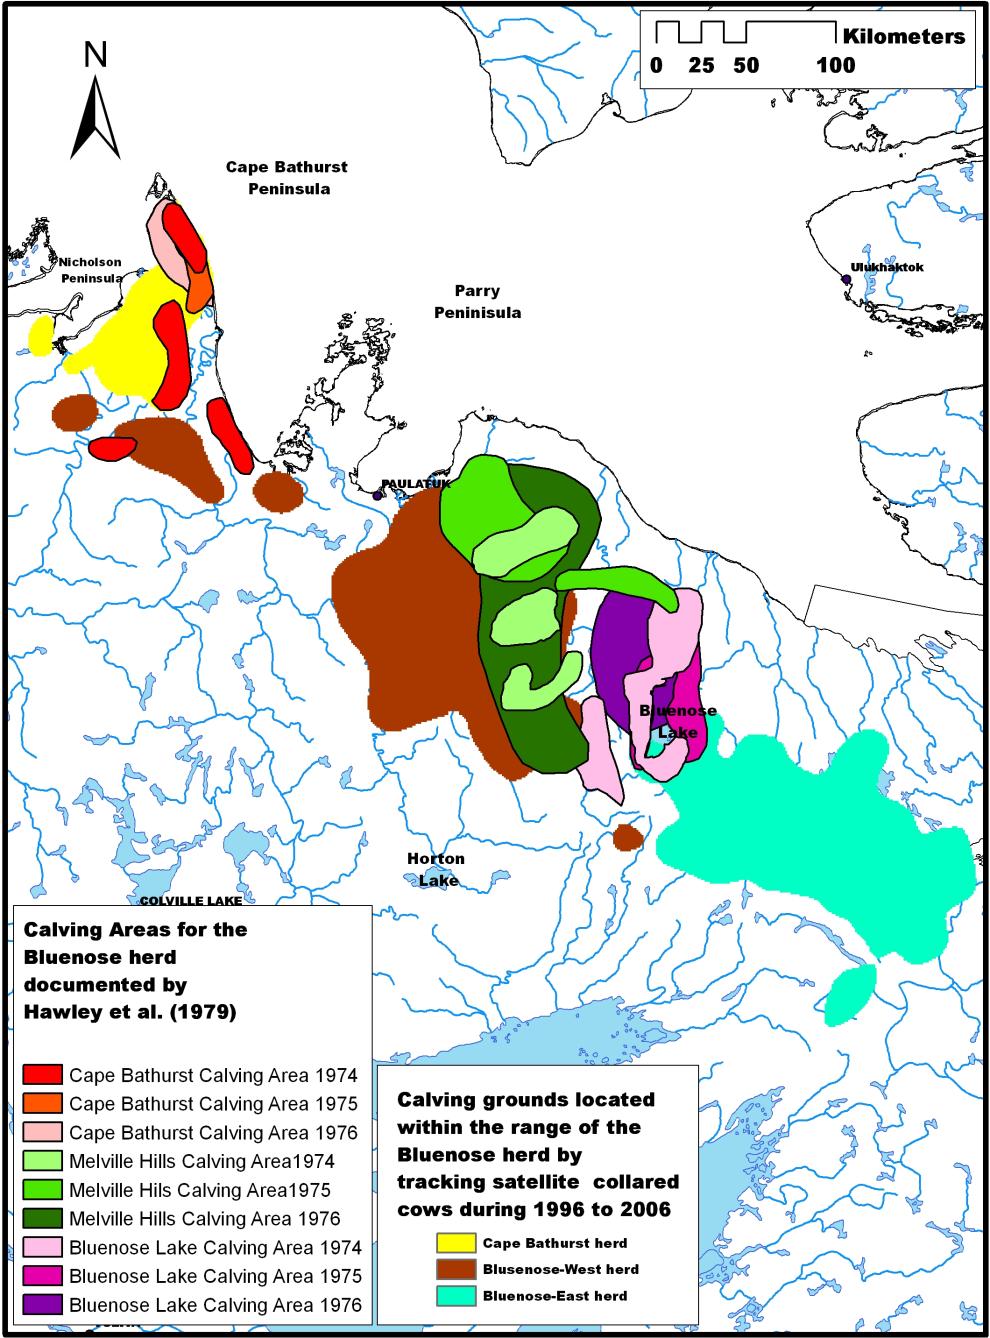 Status of Porcupine Caribou and Barren-ground Caribou in the NWT Scientific Figure 7. Comparison of luenose calving grounds 1974-76 (Hawley et al.